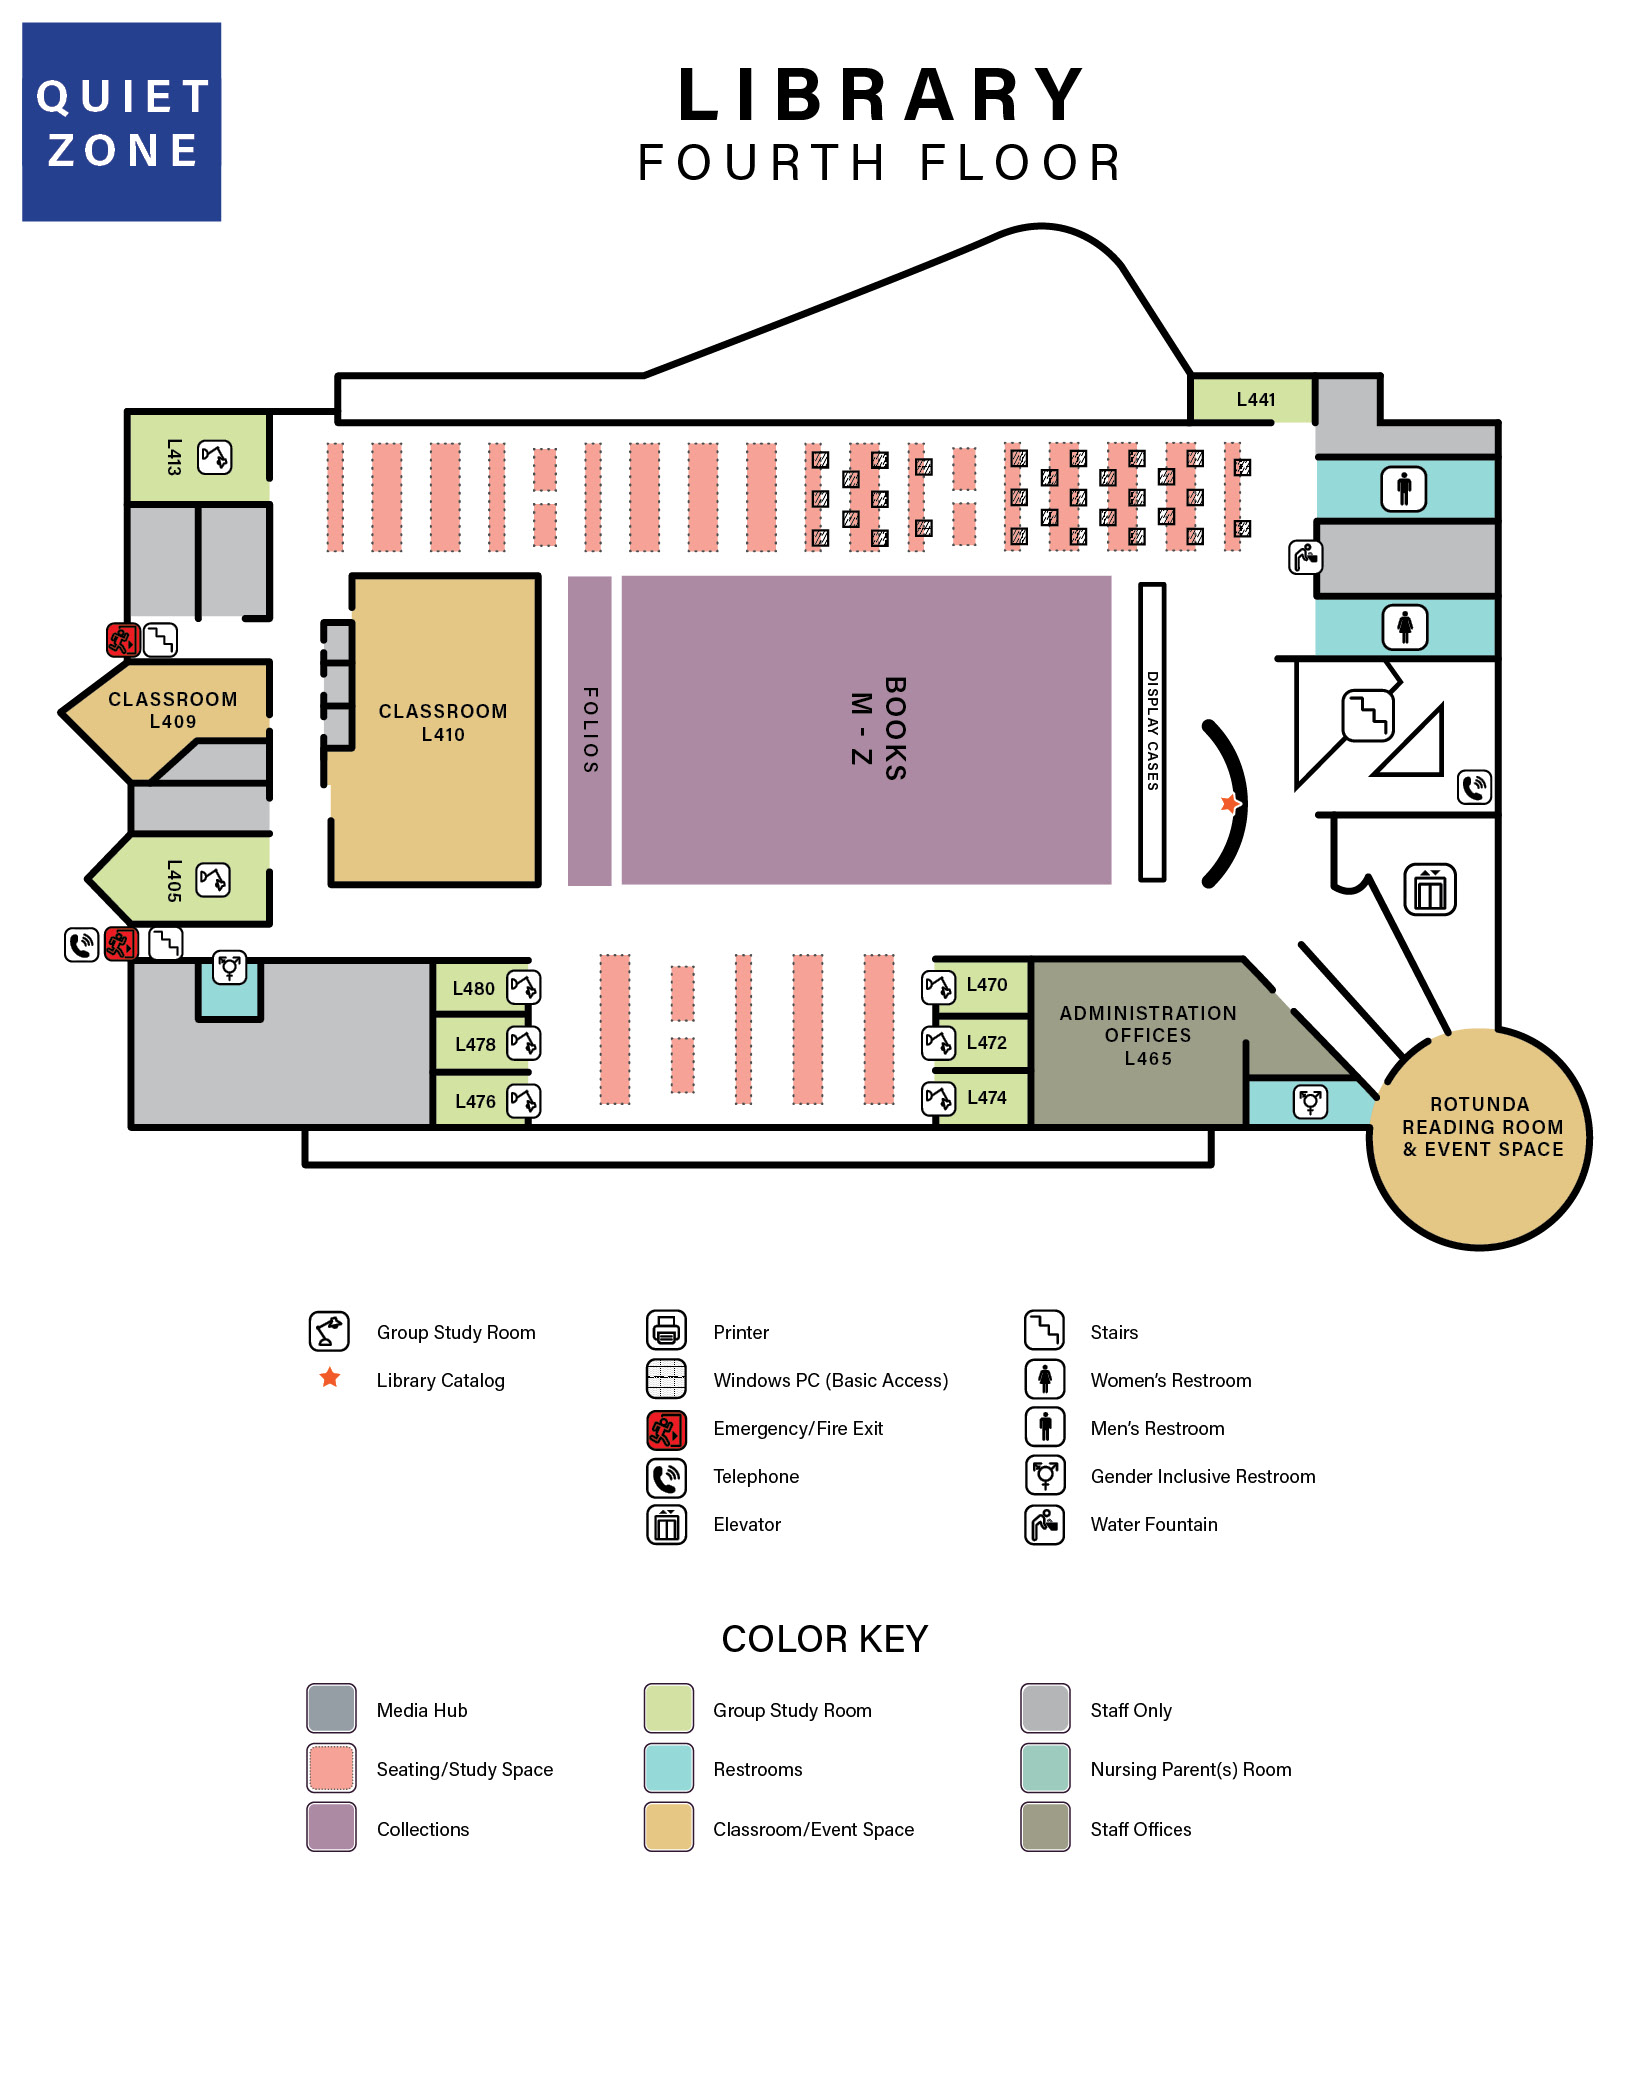 map of library fourth floor which includes descriptions of spaces and colored areas indicating types of spaces